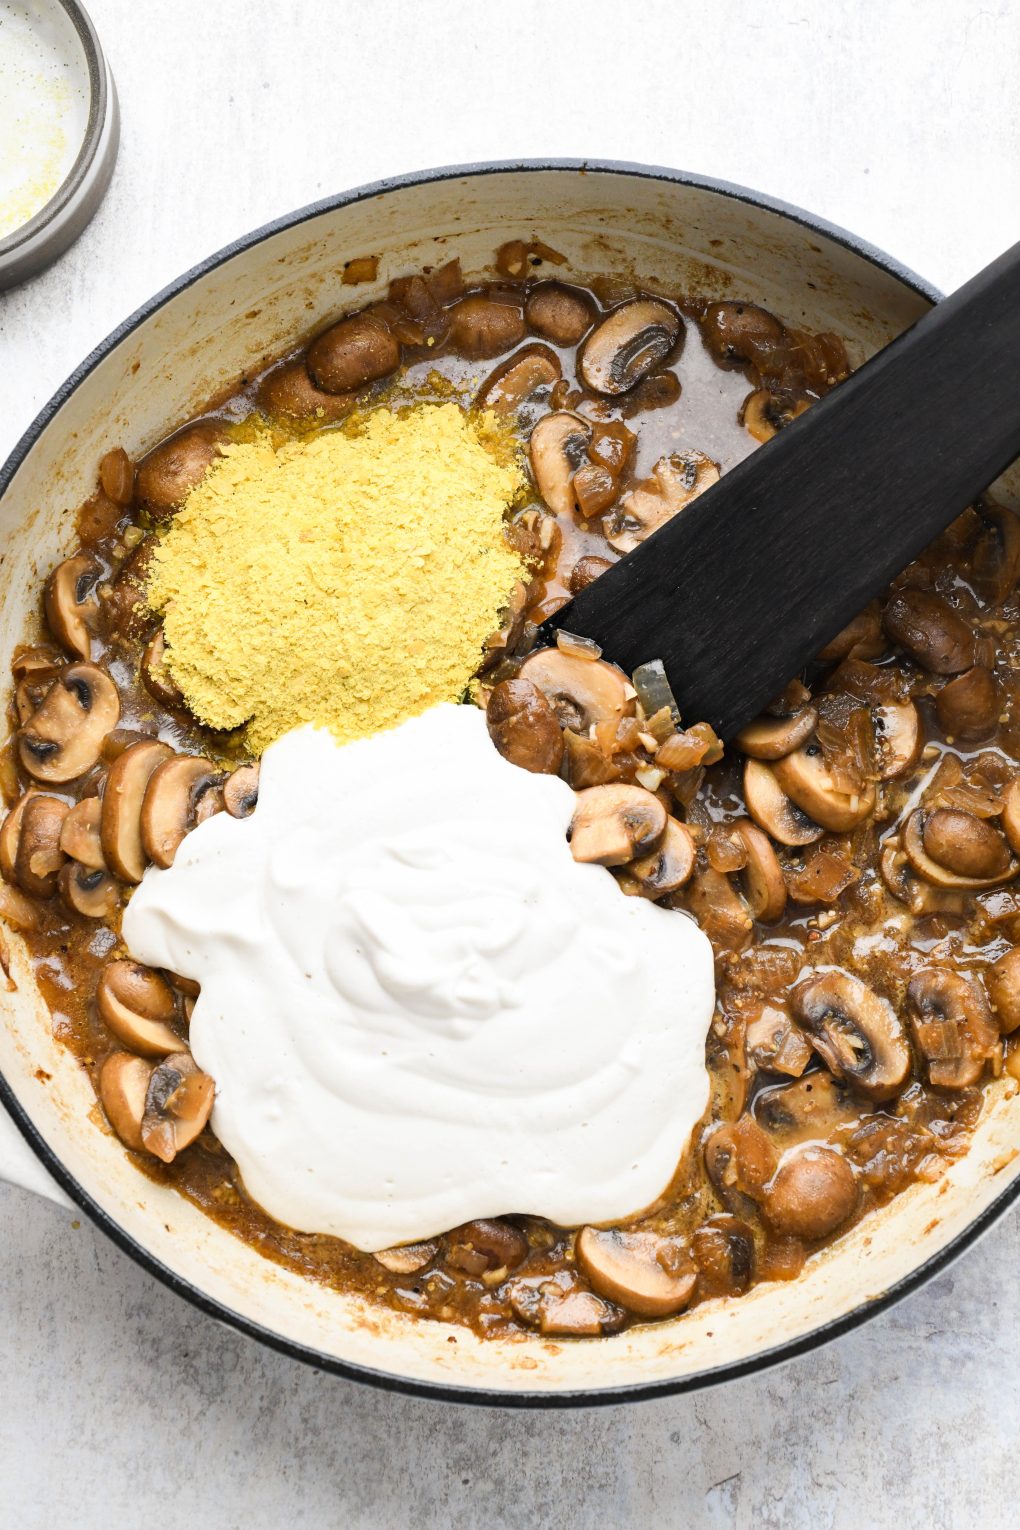 Reduced mushroom sauce with cashew cream and nutritional yeast.